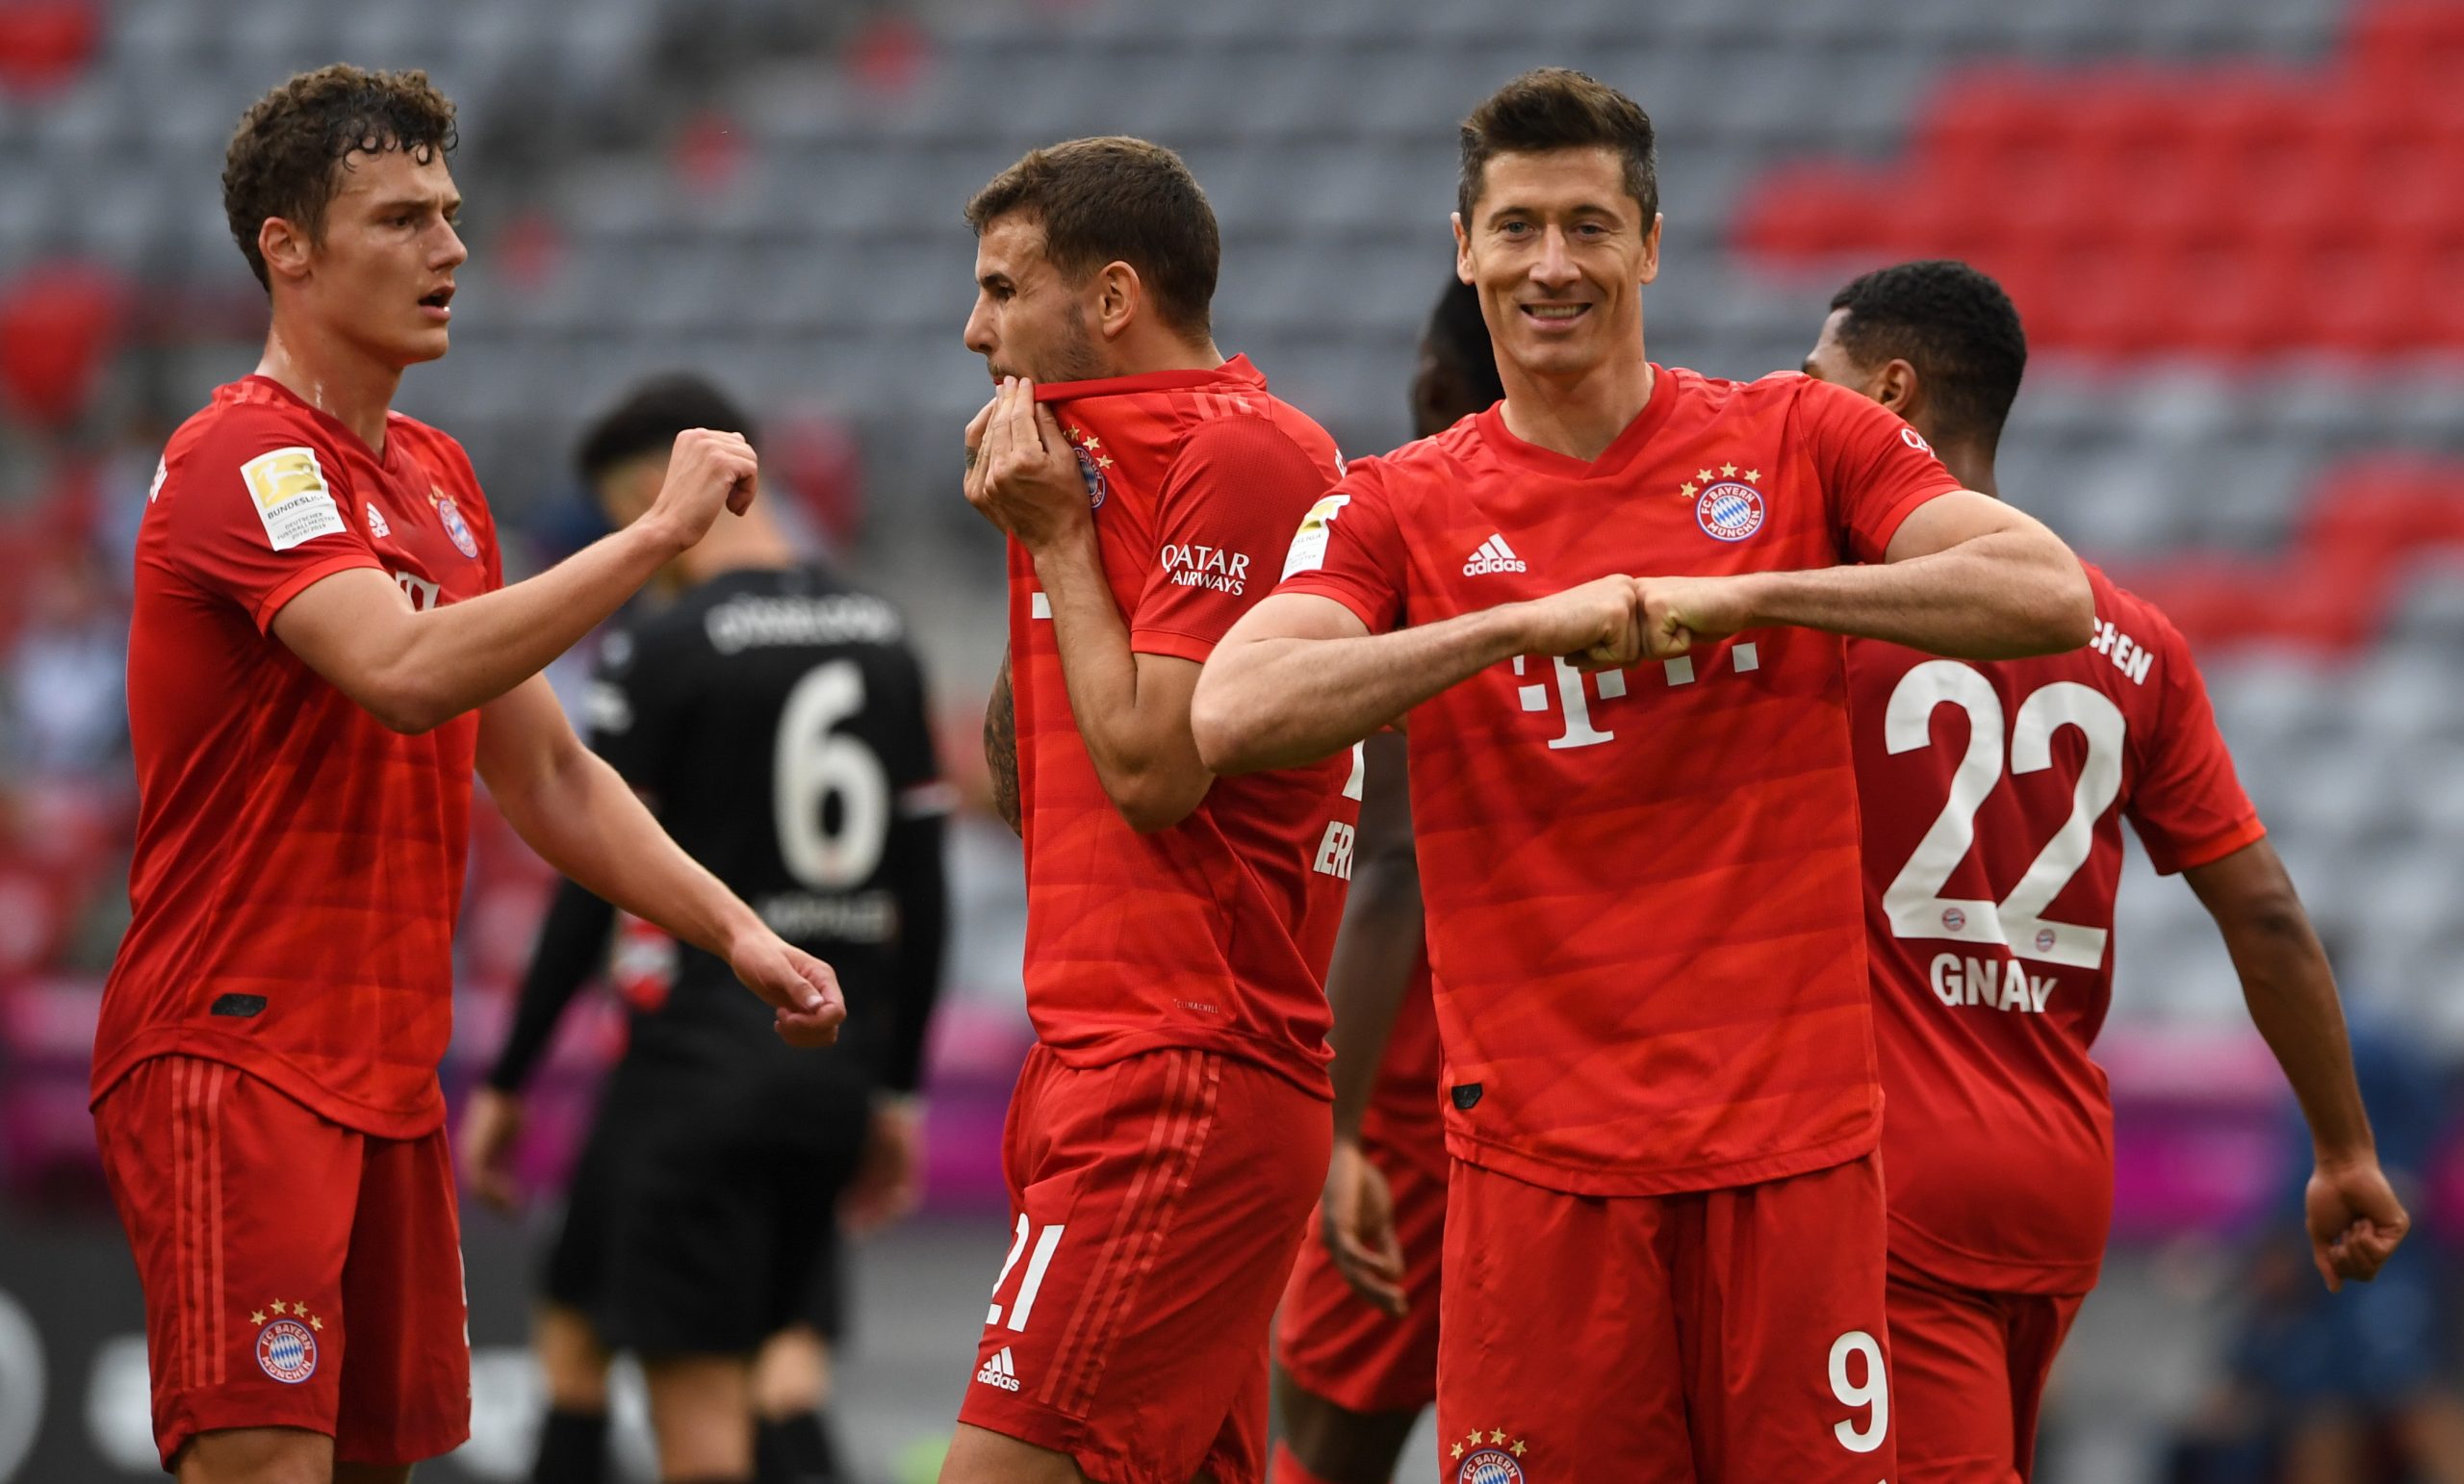 epa08454745 (L-R) Bayern Munich's French defender Benjamin Pavard, Bayern Munich's French defender Lucas Hernandez and Bayern Munich's Polish forward Robert Lewandowski celebrate the 3-0 during the German Bundesliga soccer match between FC Bayern Munich and Fortuna Duesseldorf at the Allianz Arena stadium in Munich, southern Germany, 30 May 2020.  EPA/CHRISTOF STACHE / POOL CONDITIONS - ATTENTION:  The DFL regulations prohibit any use of photographs as image sequences and/or quasi-video.